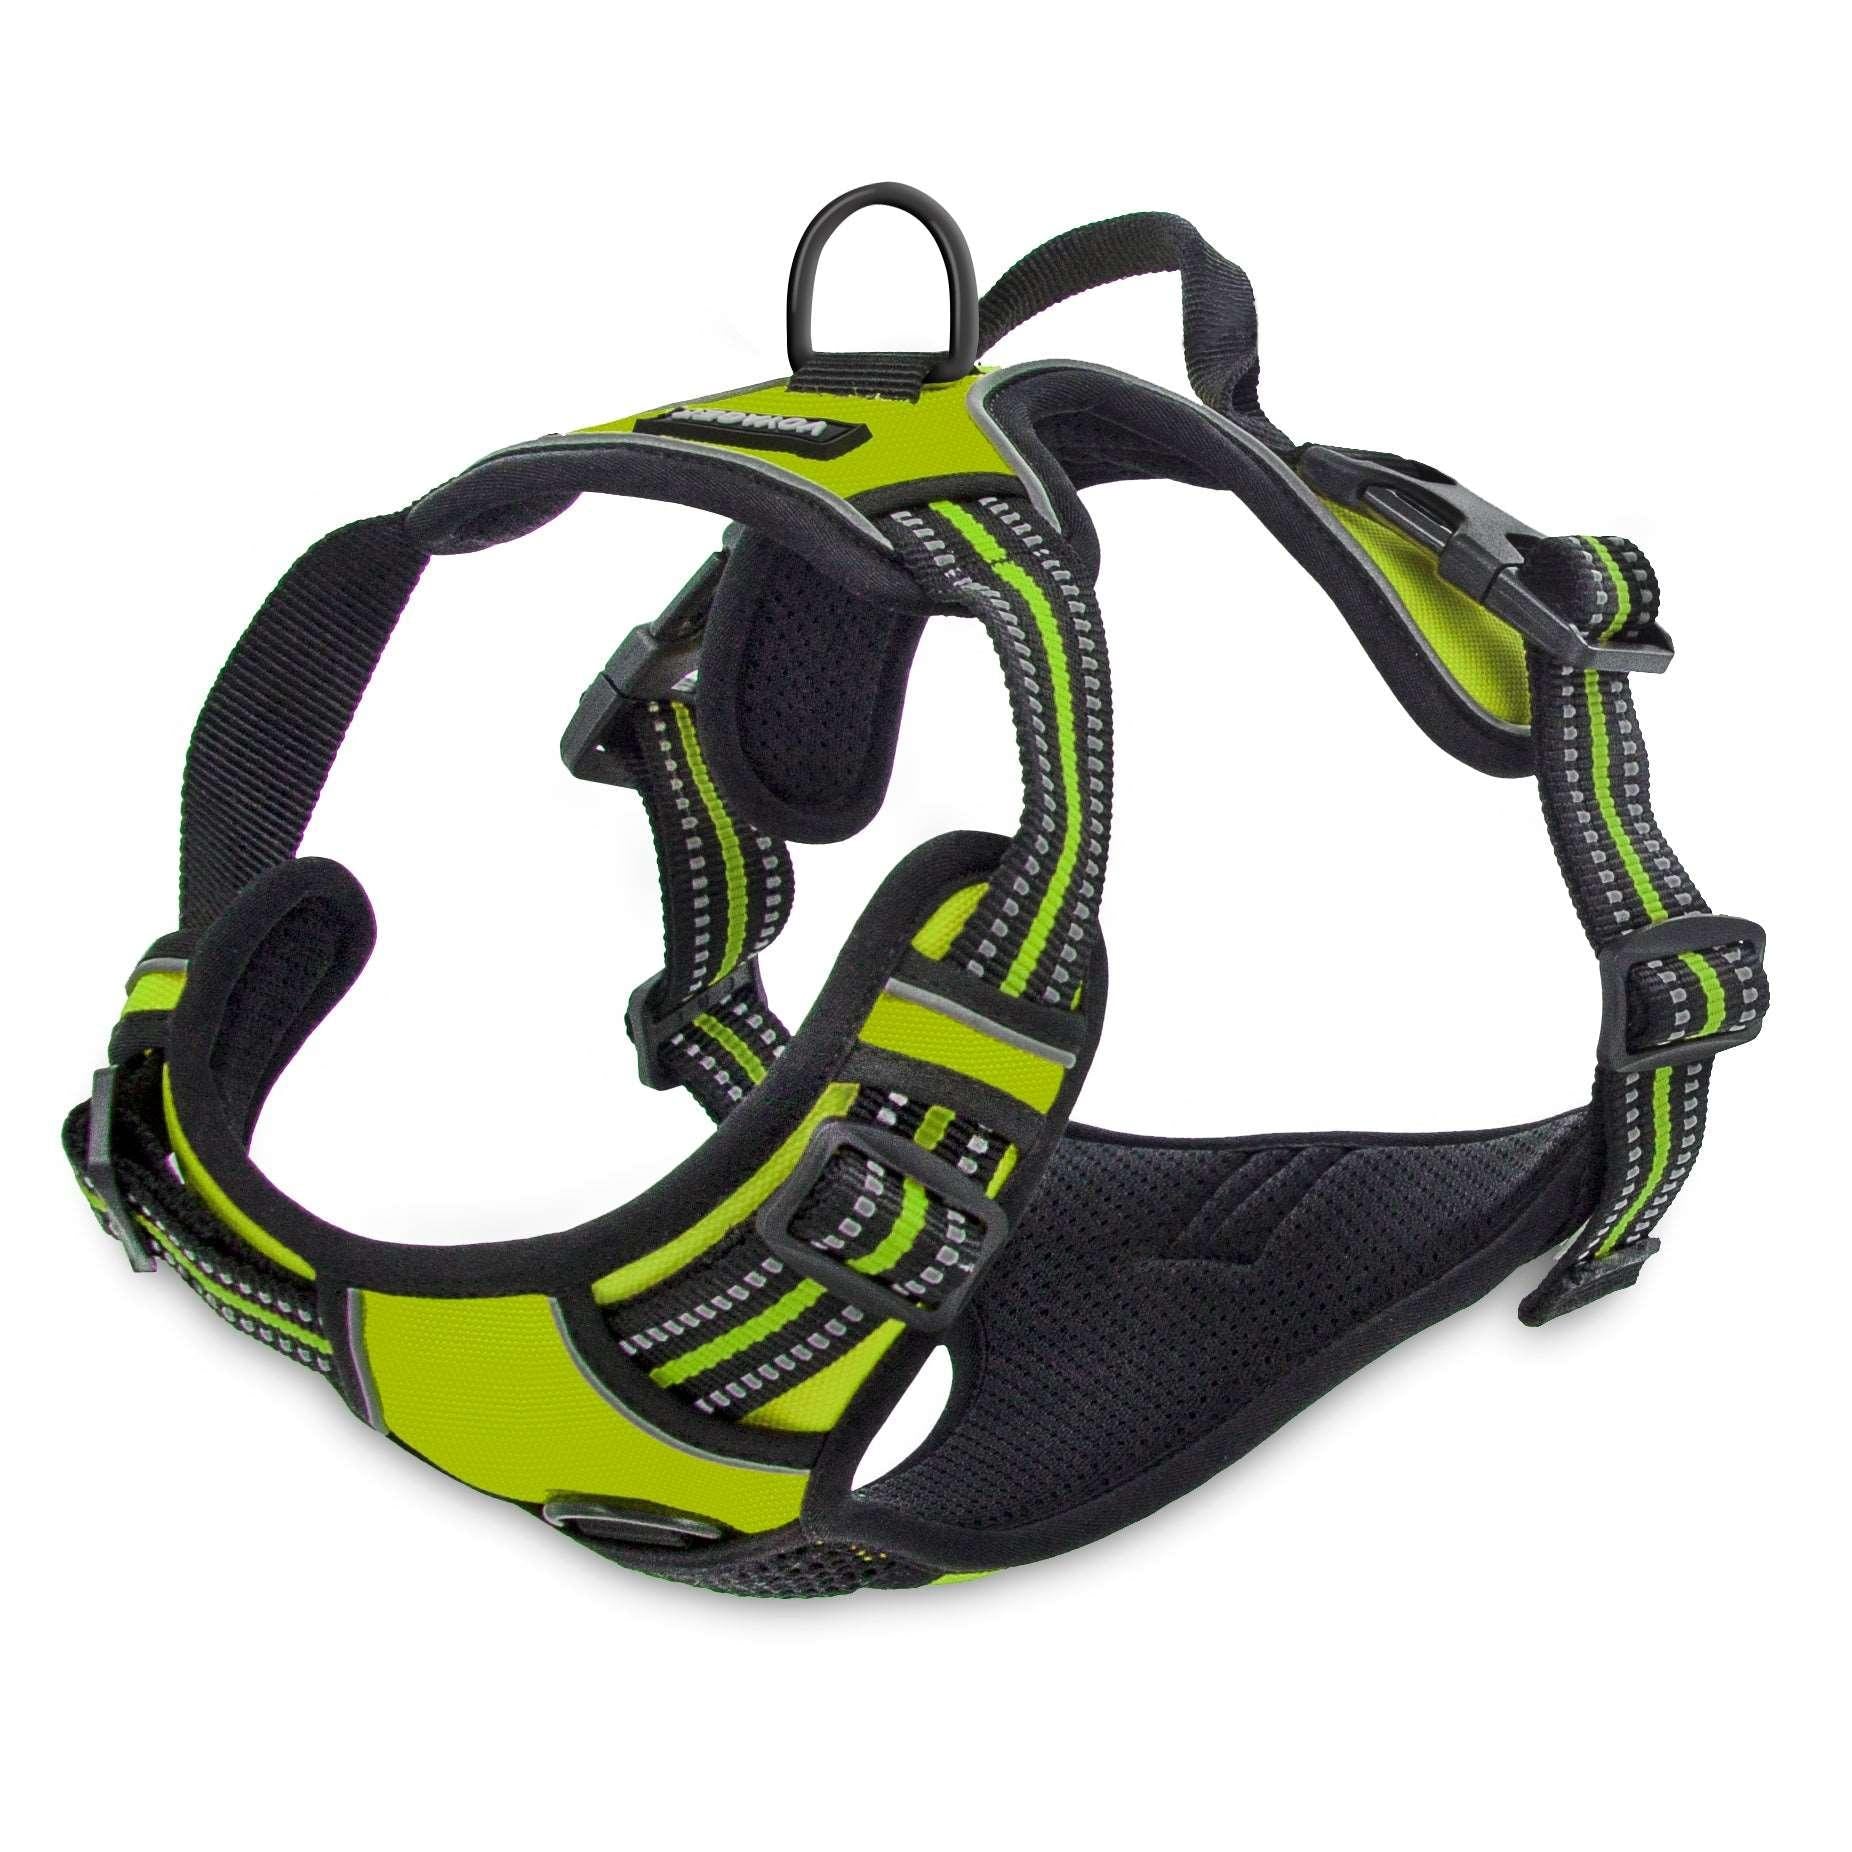 VOYAGER Dual-Attachment Dog Harness in Lime Green - Expanded